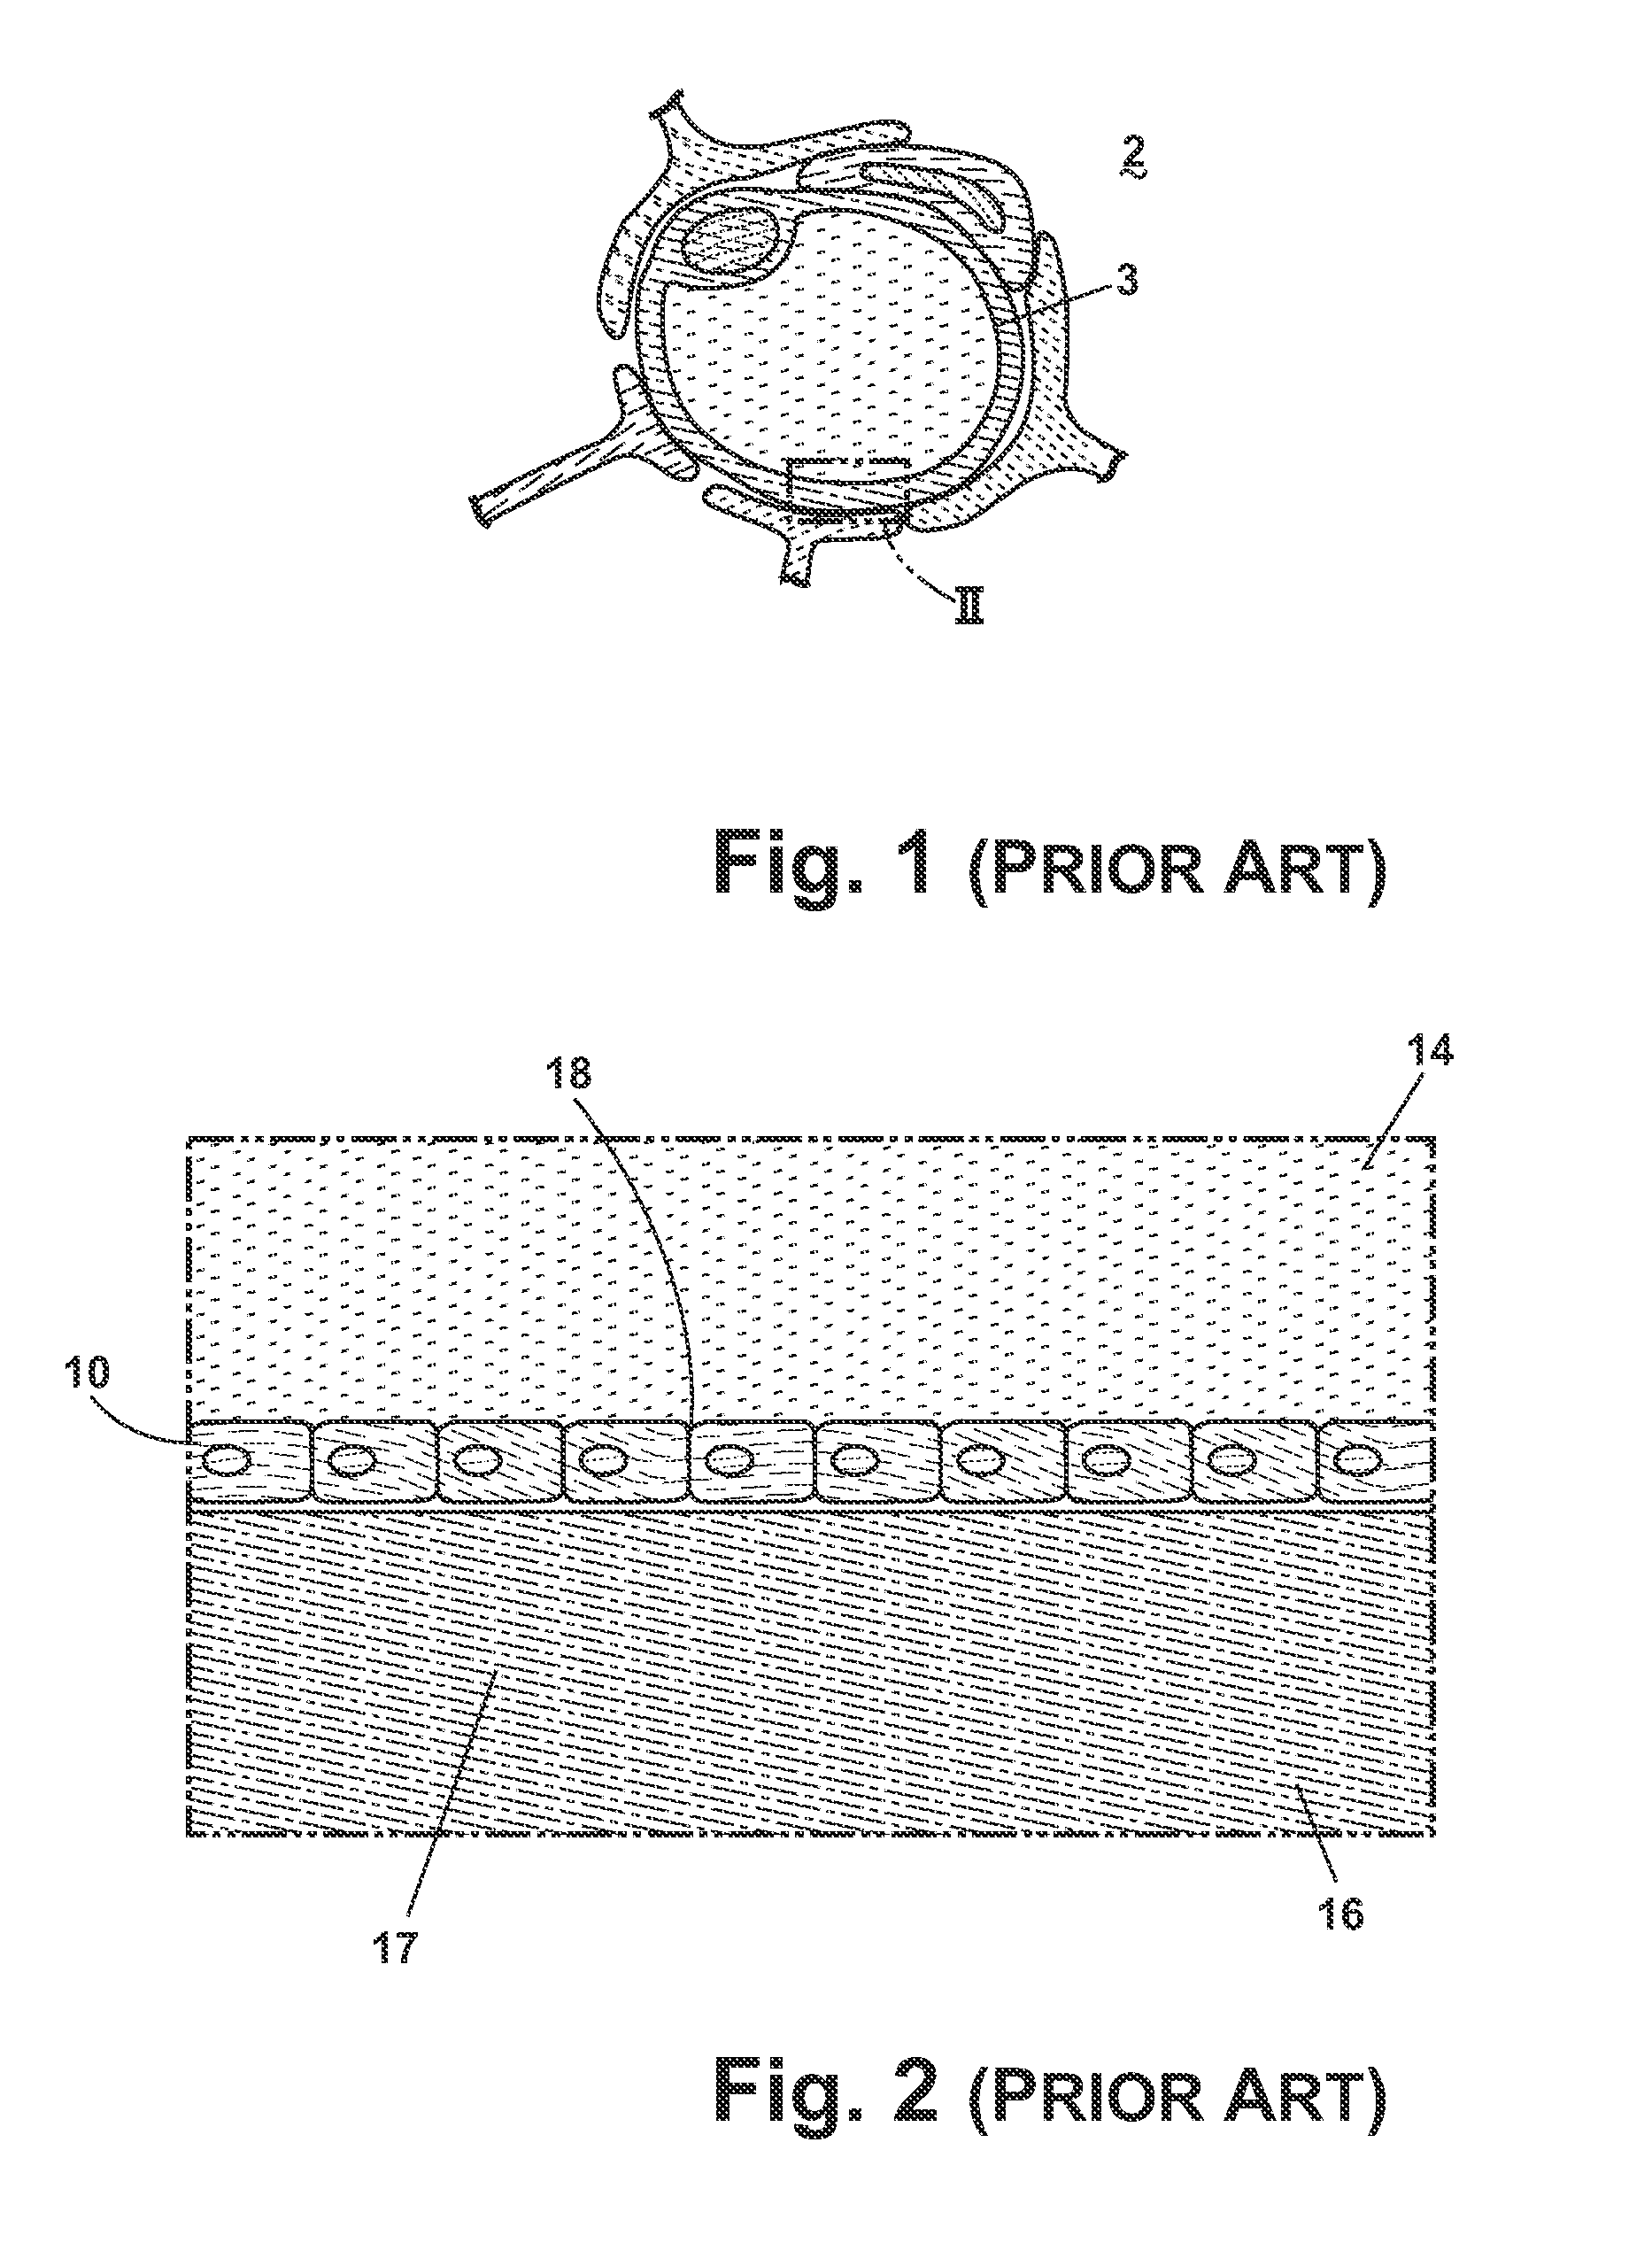 Composition and methods of treatment of bacterial meningitis